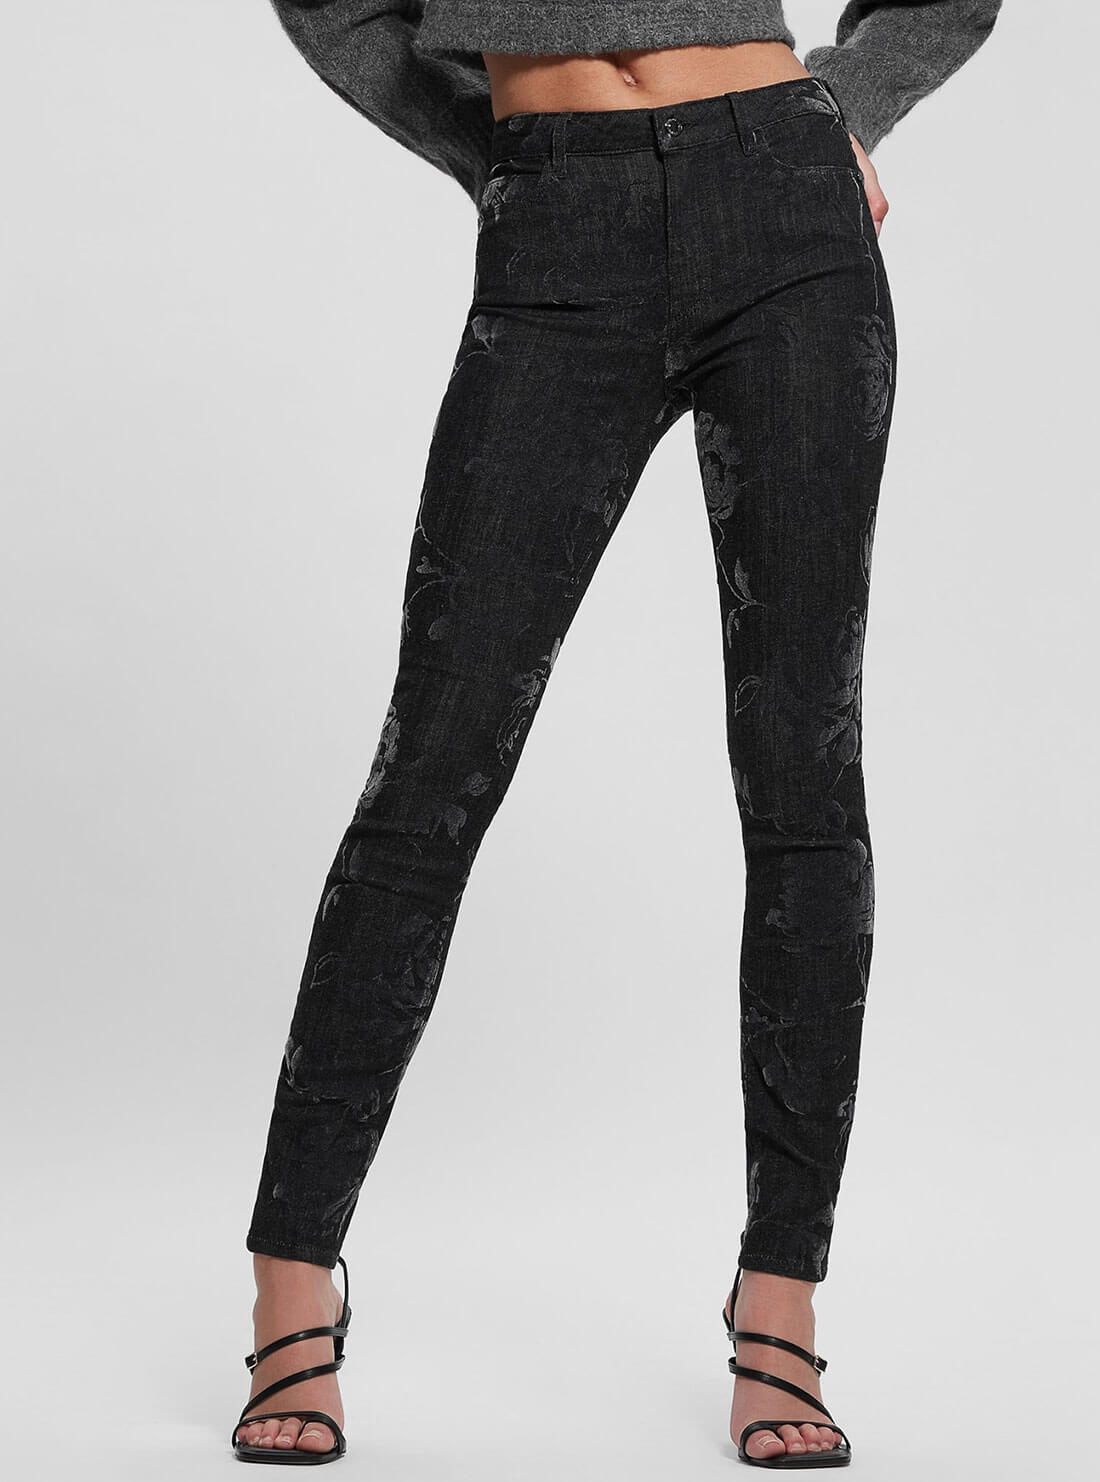 High-Rise 1981 Skinny Leg Denim Jeans In Armstrong Wash | GUESS Women's Apparel | front view